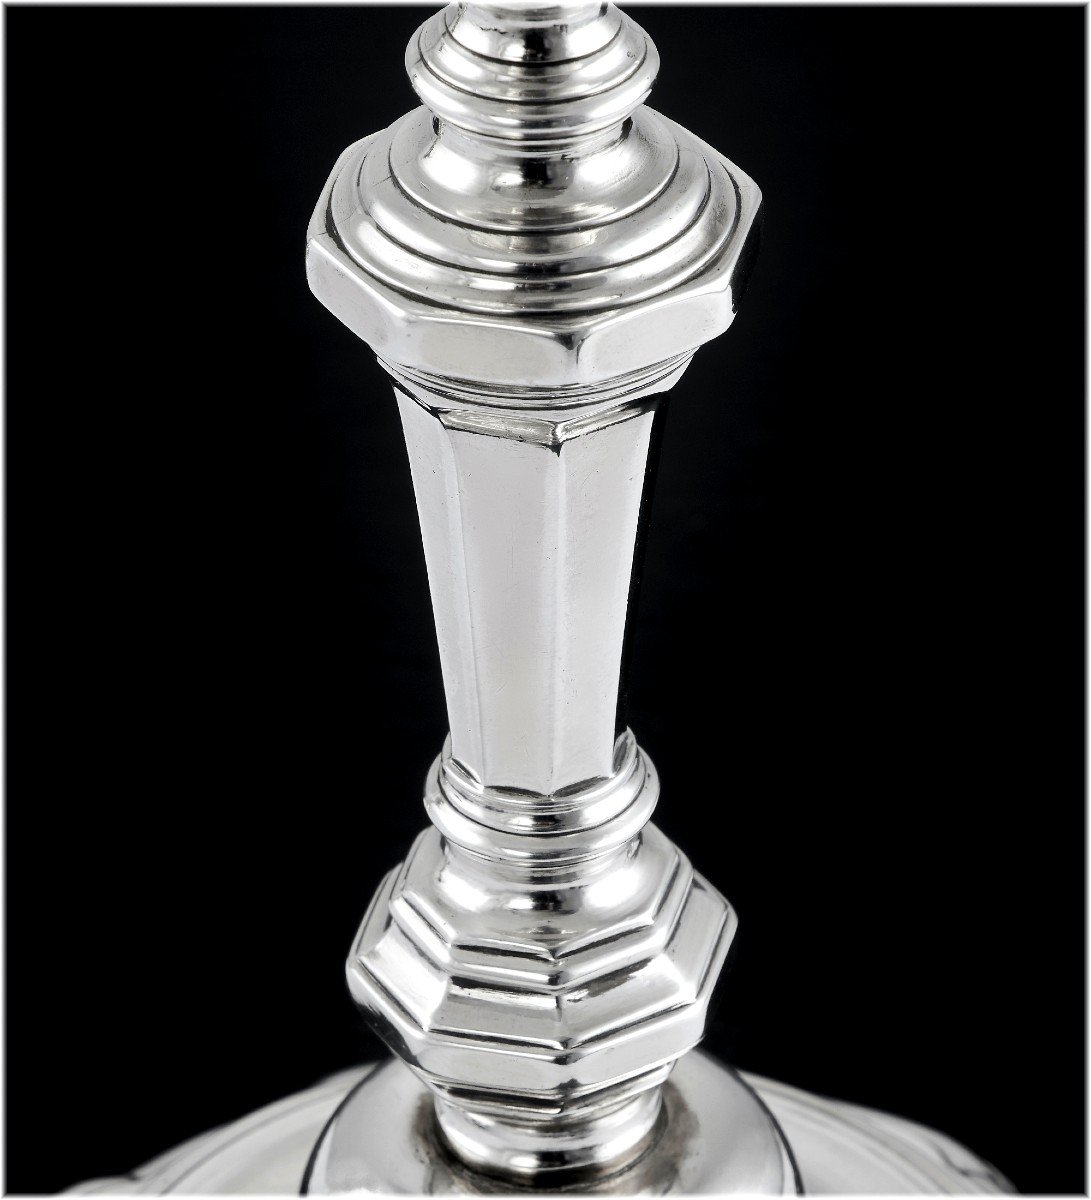 Pierre Vallieres: Rare Pair Of 18th Century French Solid Silver Candlesticks Paris - 1776-photo-3